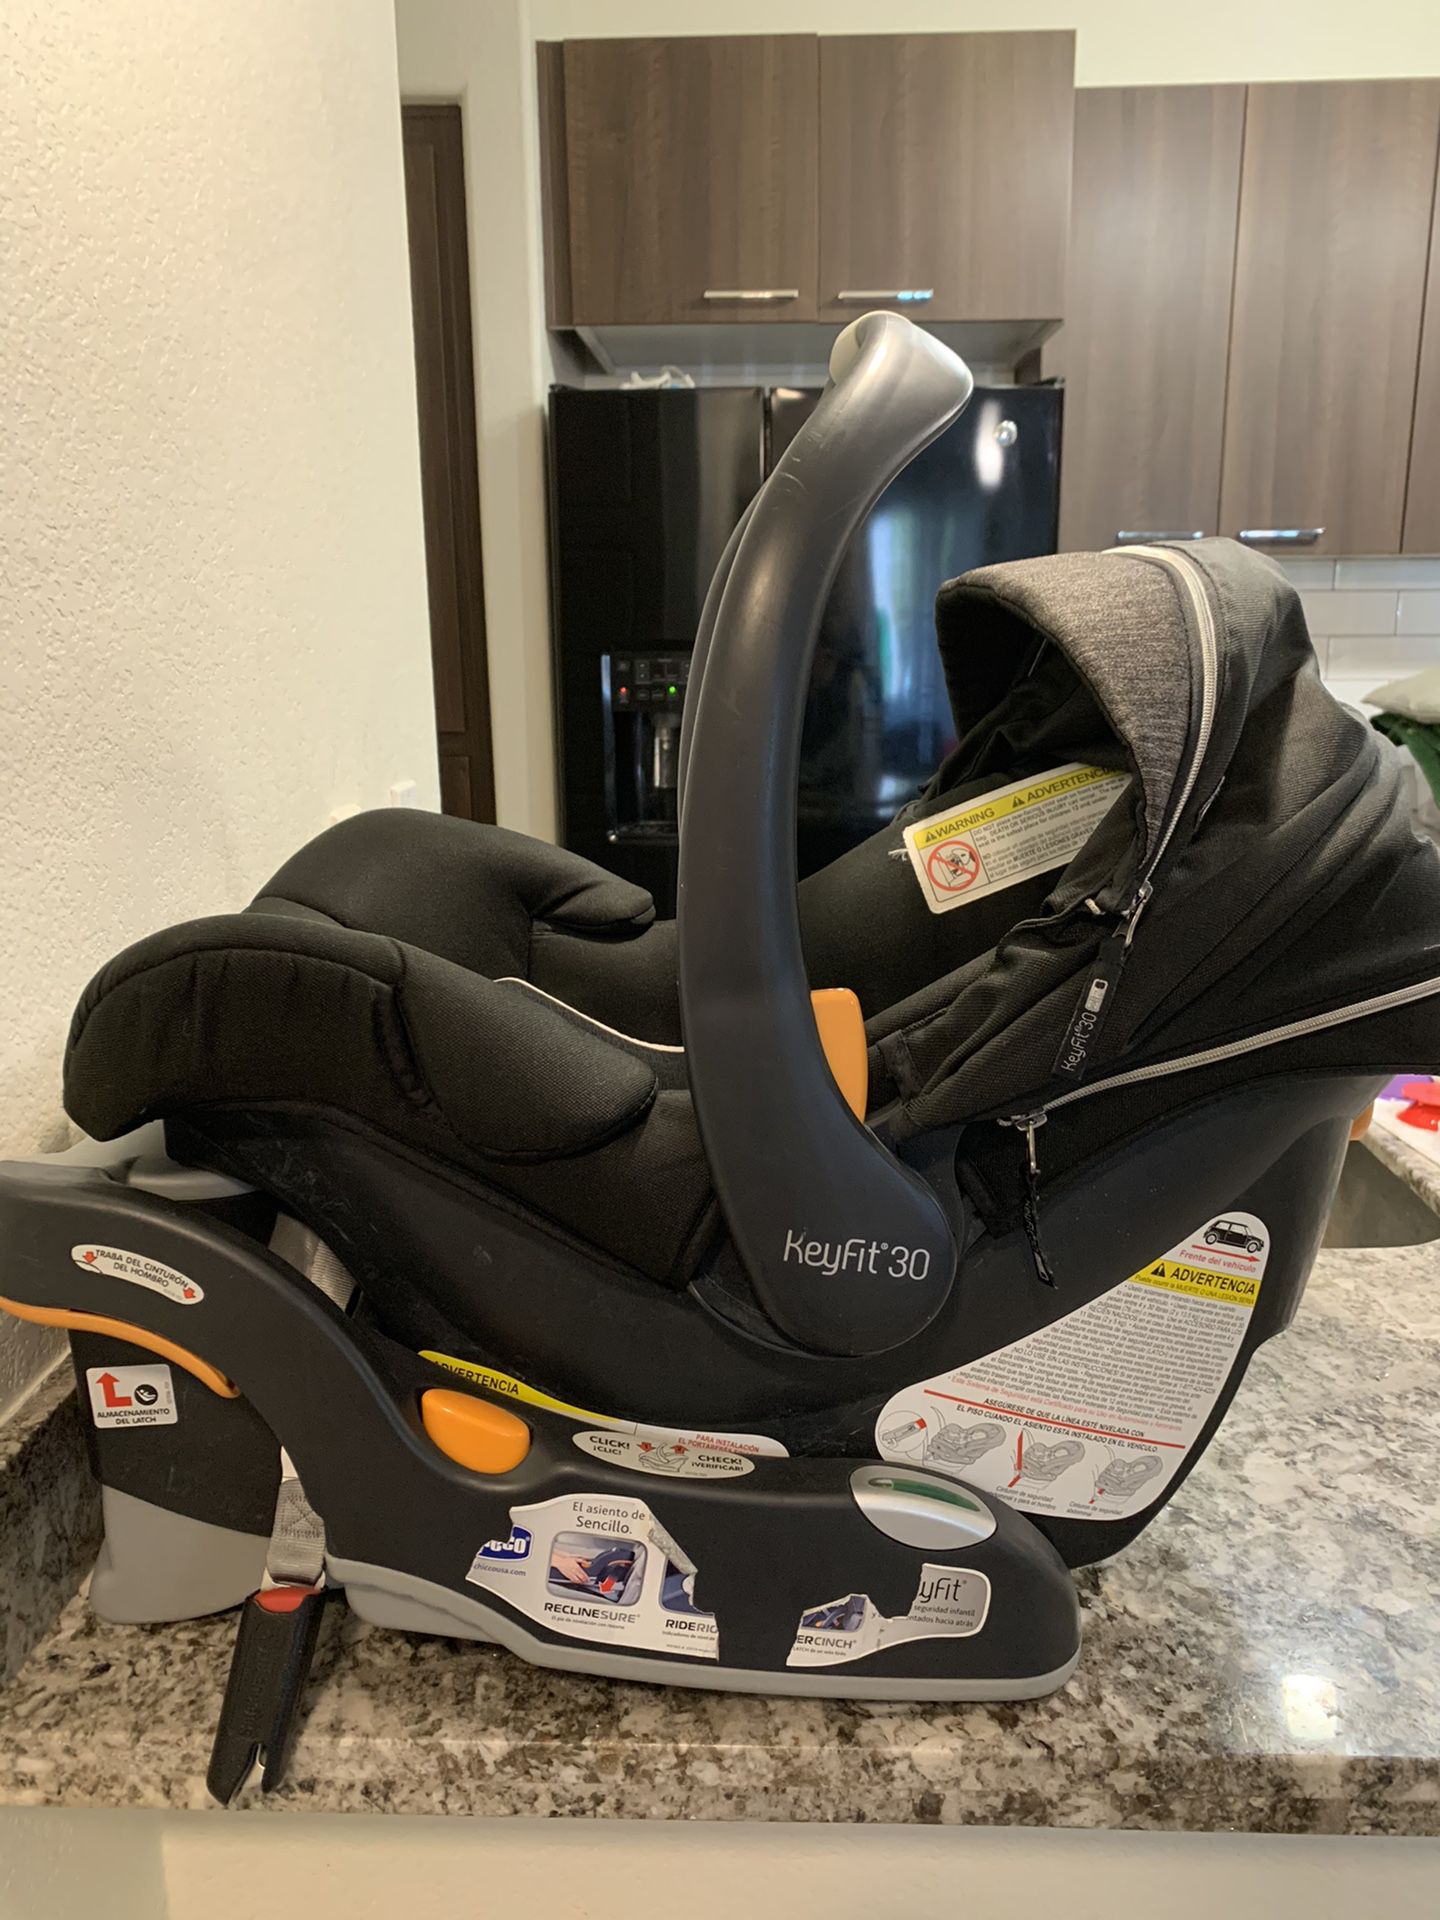 Chicco infant car seat